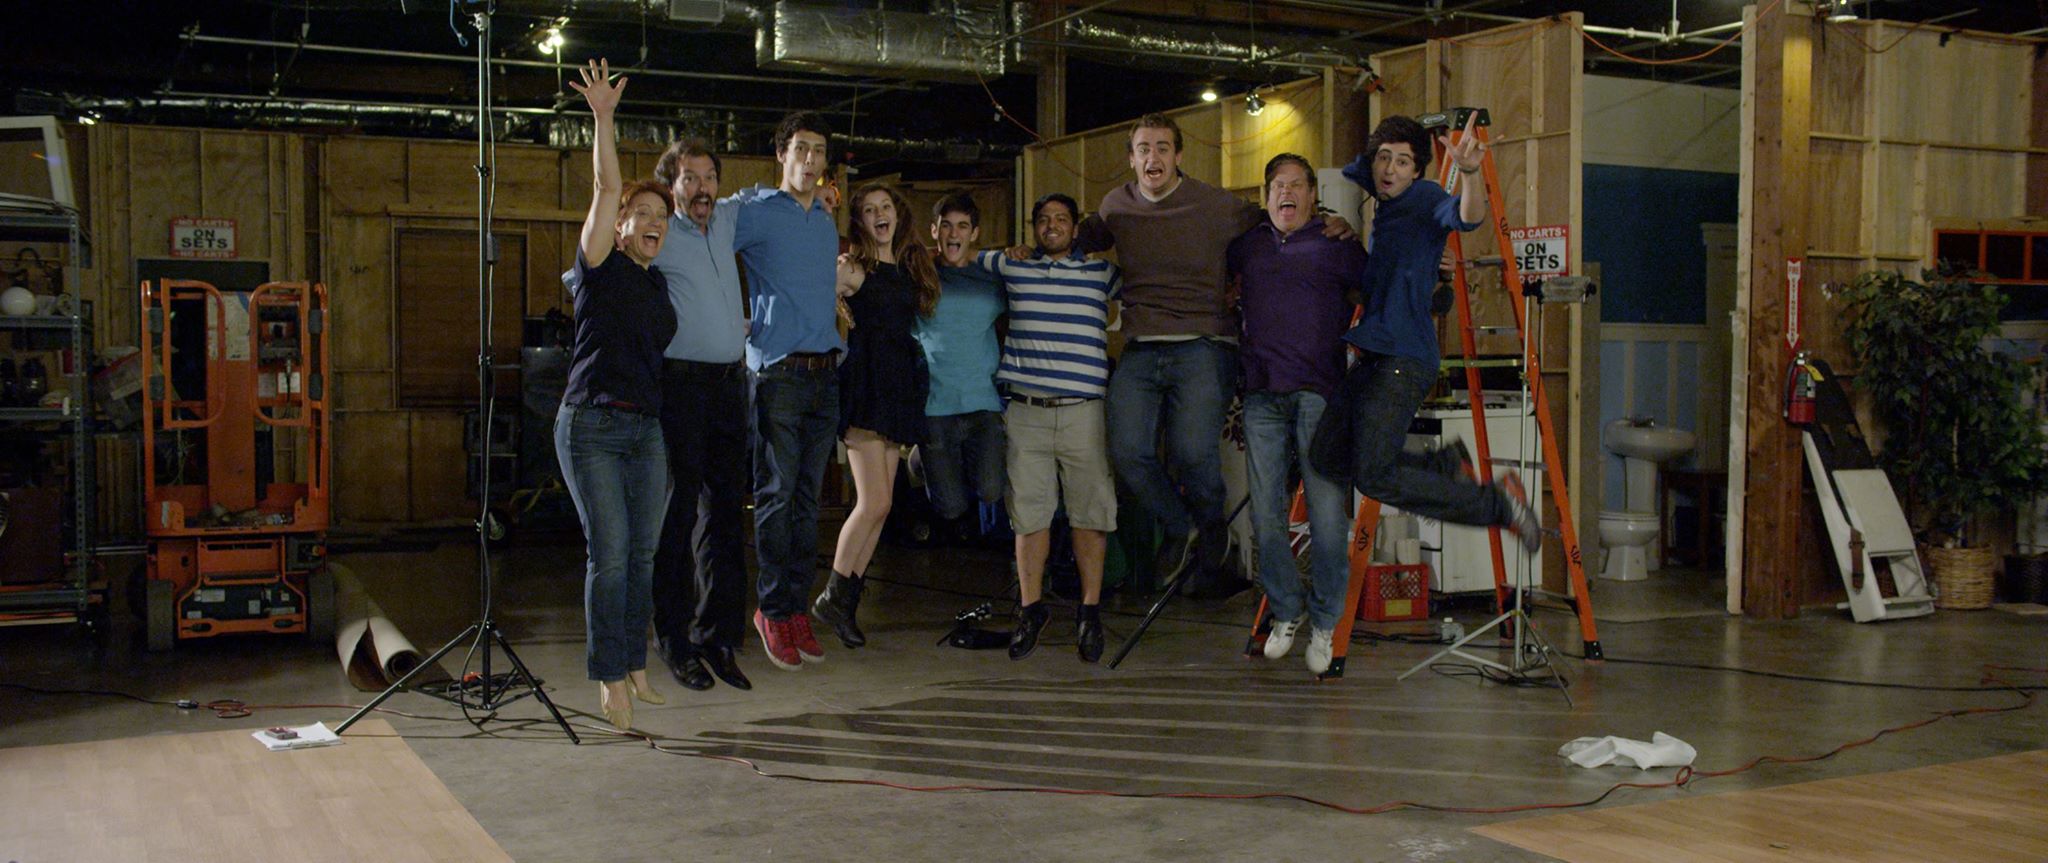 Cast and crew photo on the set of The Time Capsule